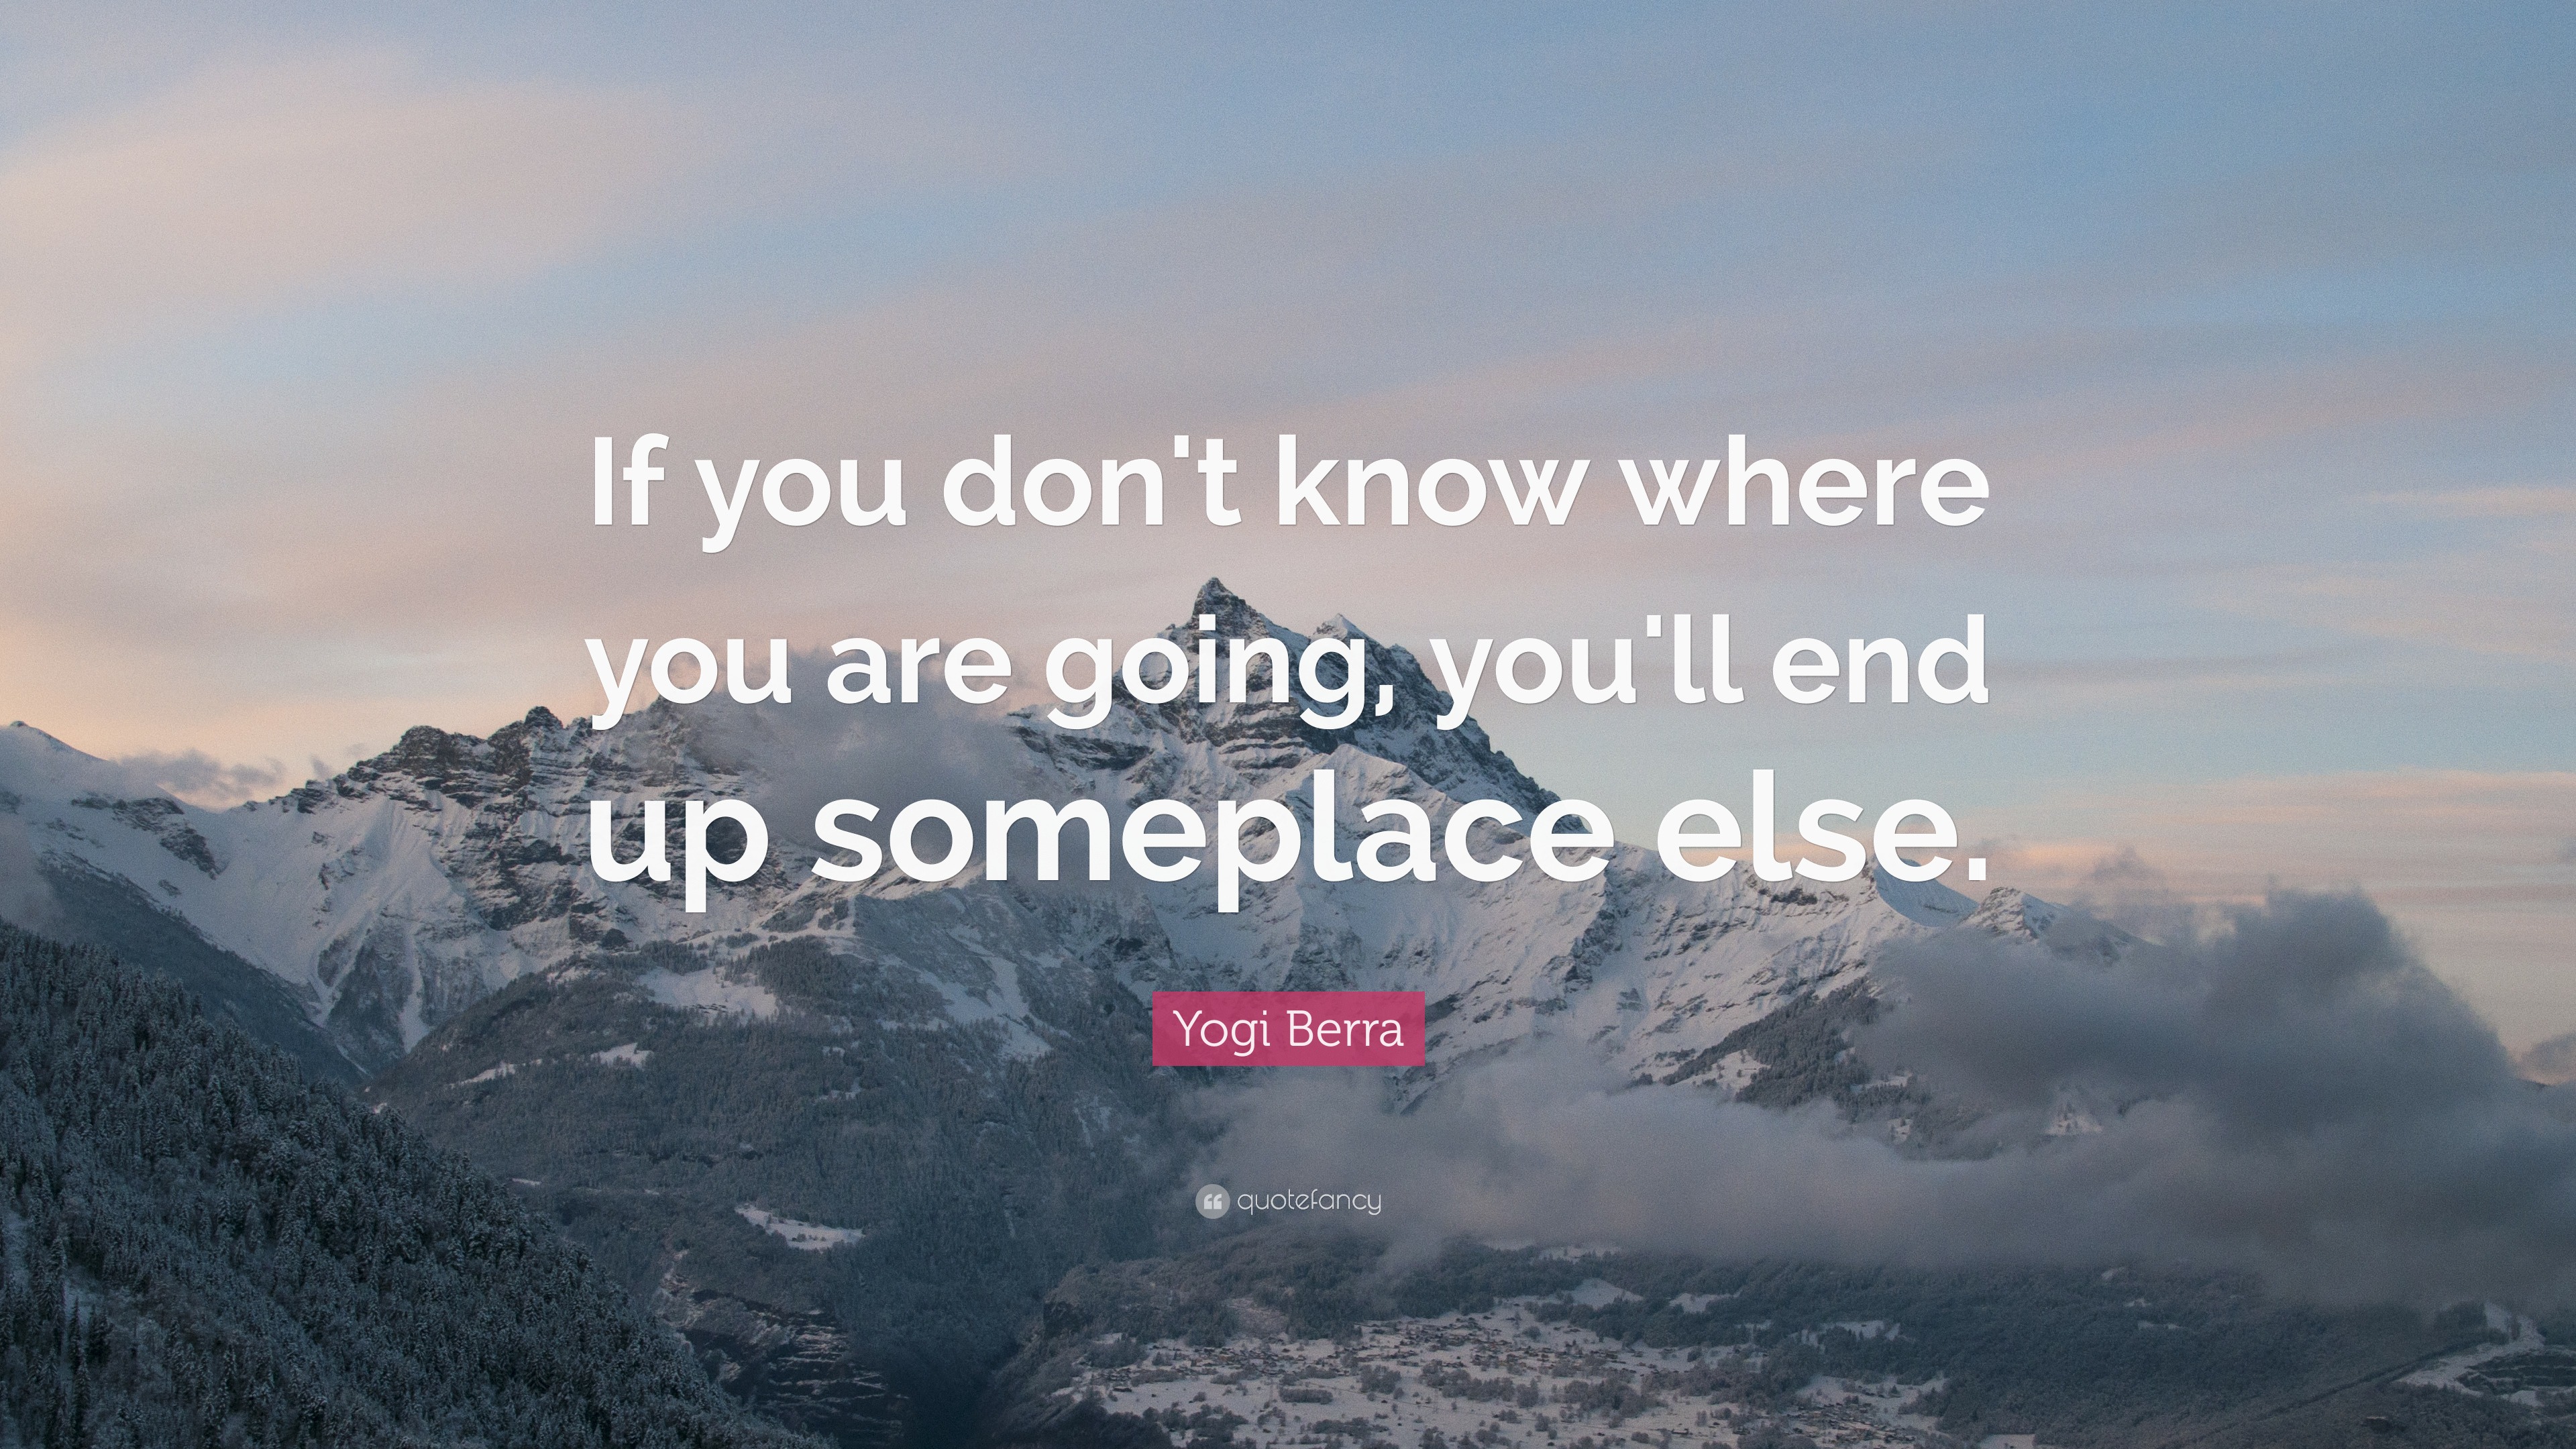 Yogi Berra Quote: “If you don't know where you are going, you'll end up